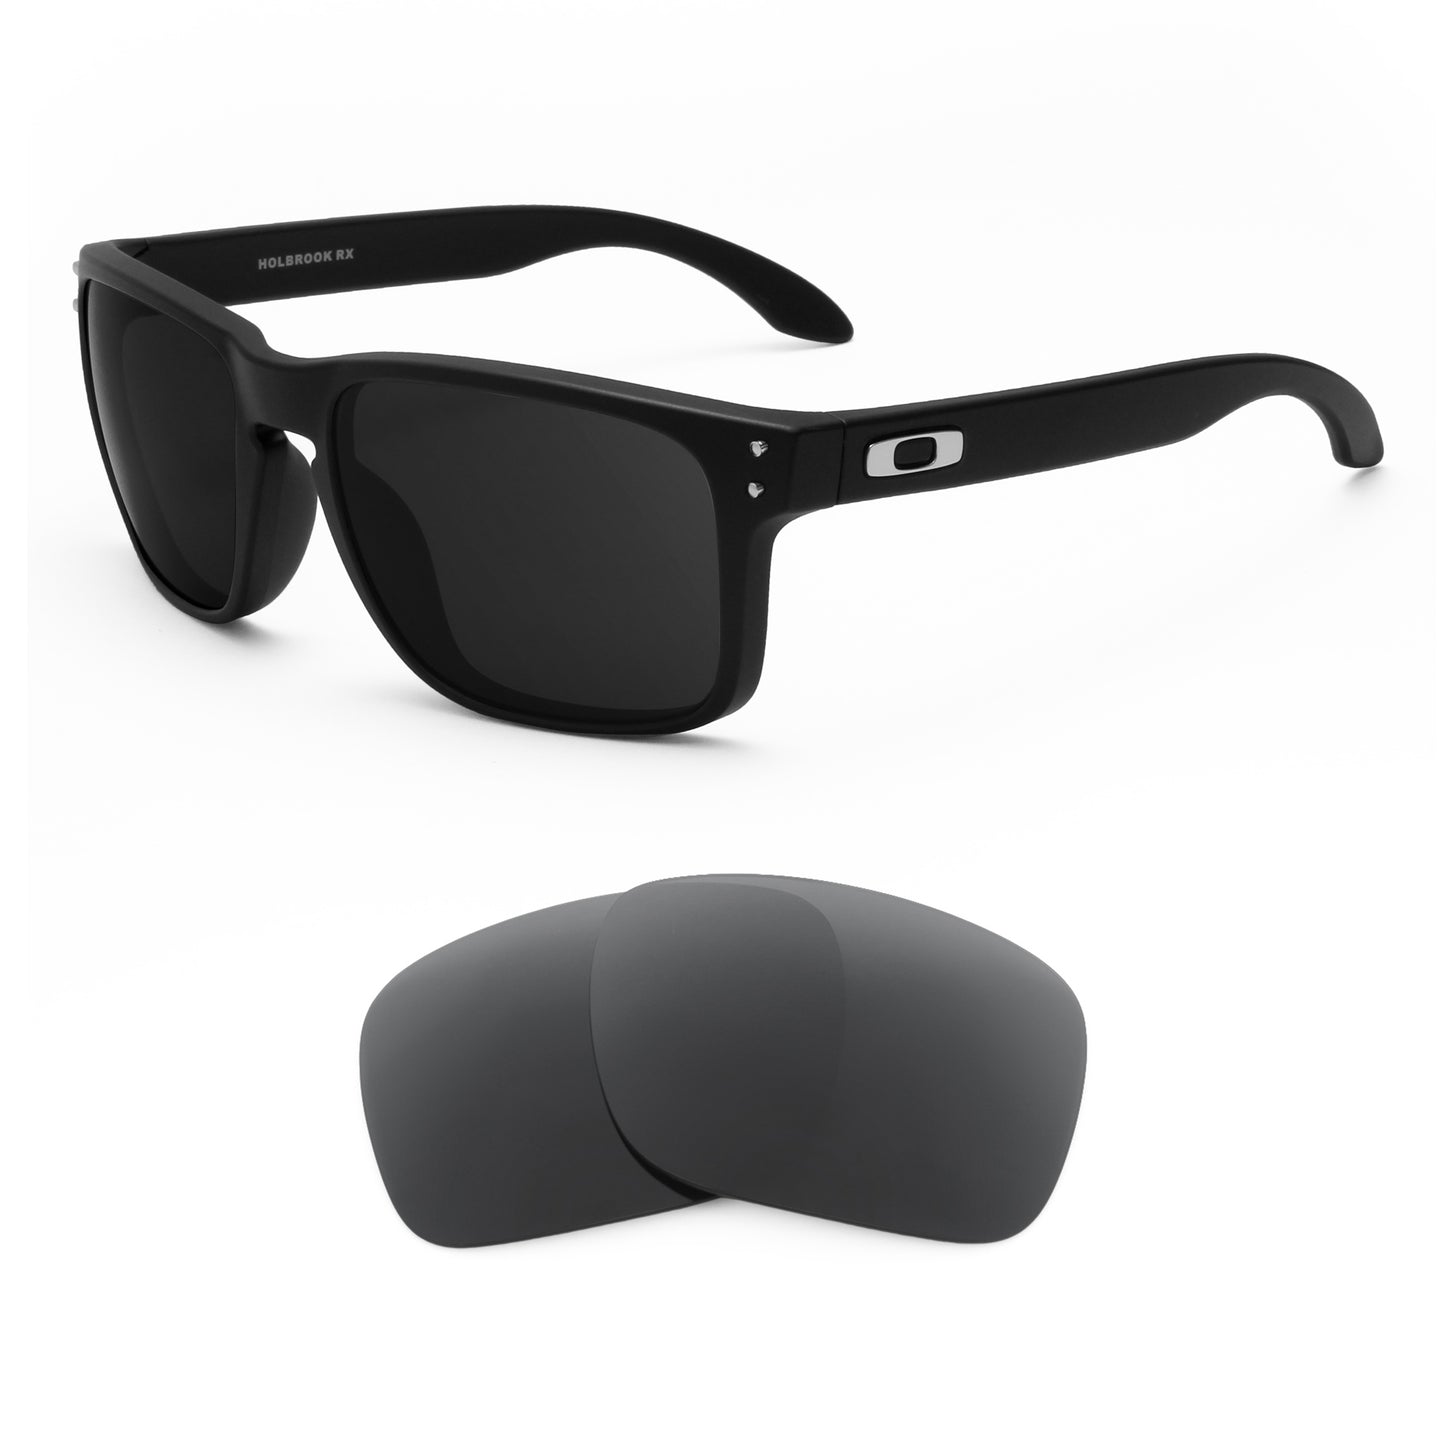 Oakley Holbrook Rx 56 sunglasses with replacement lenses